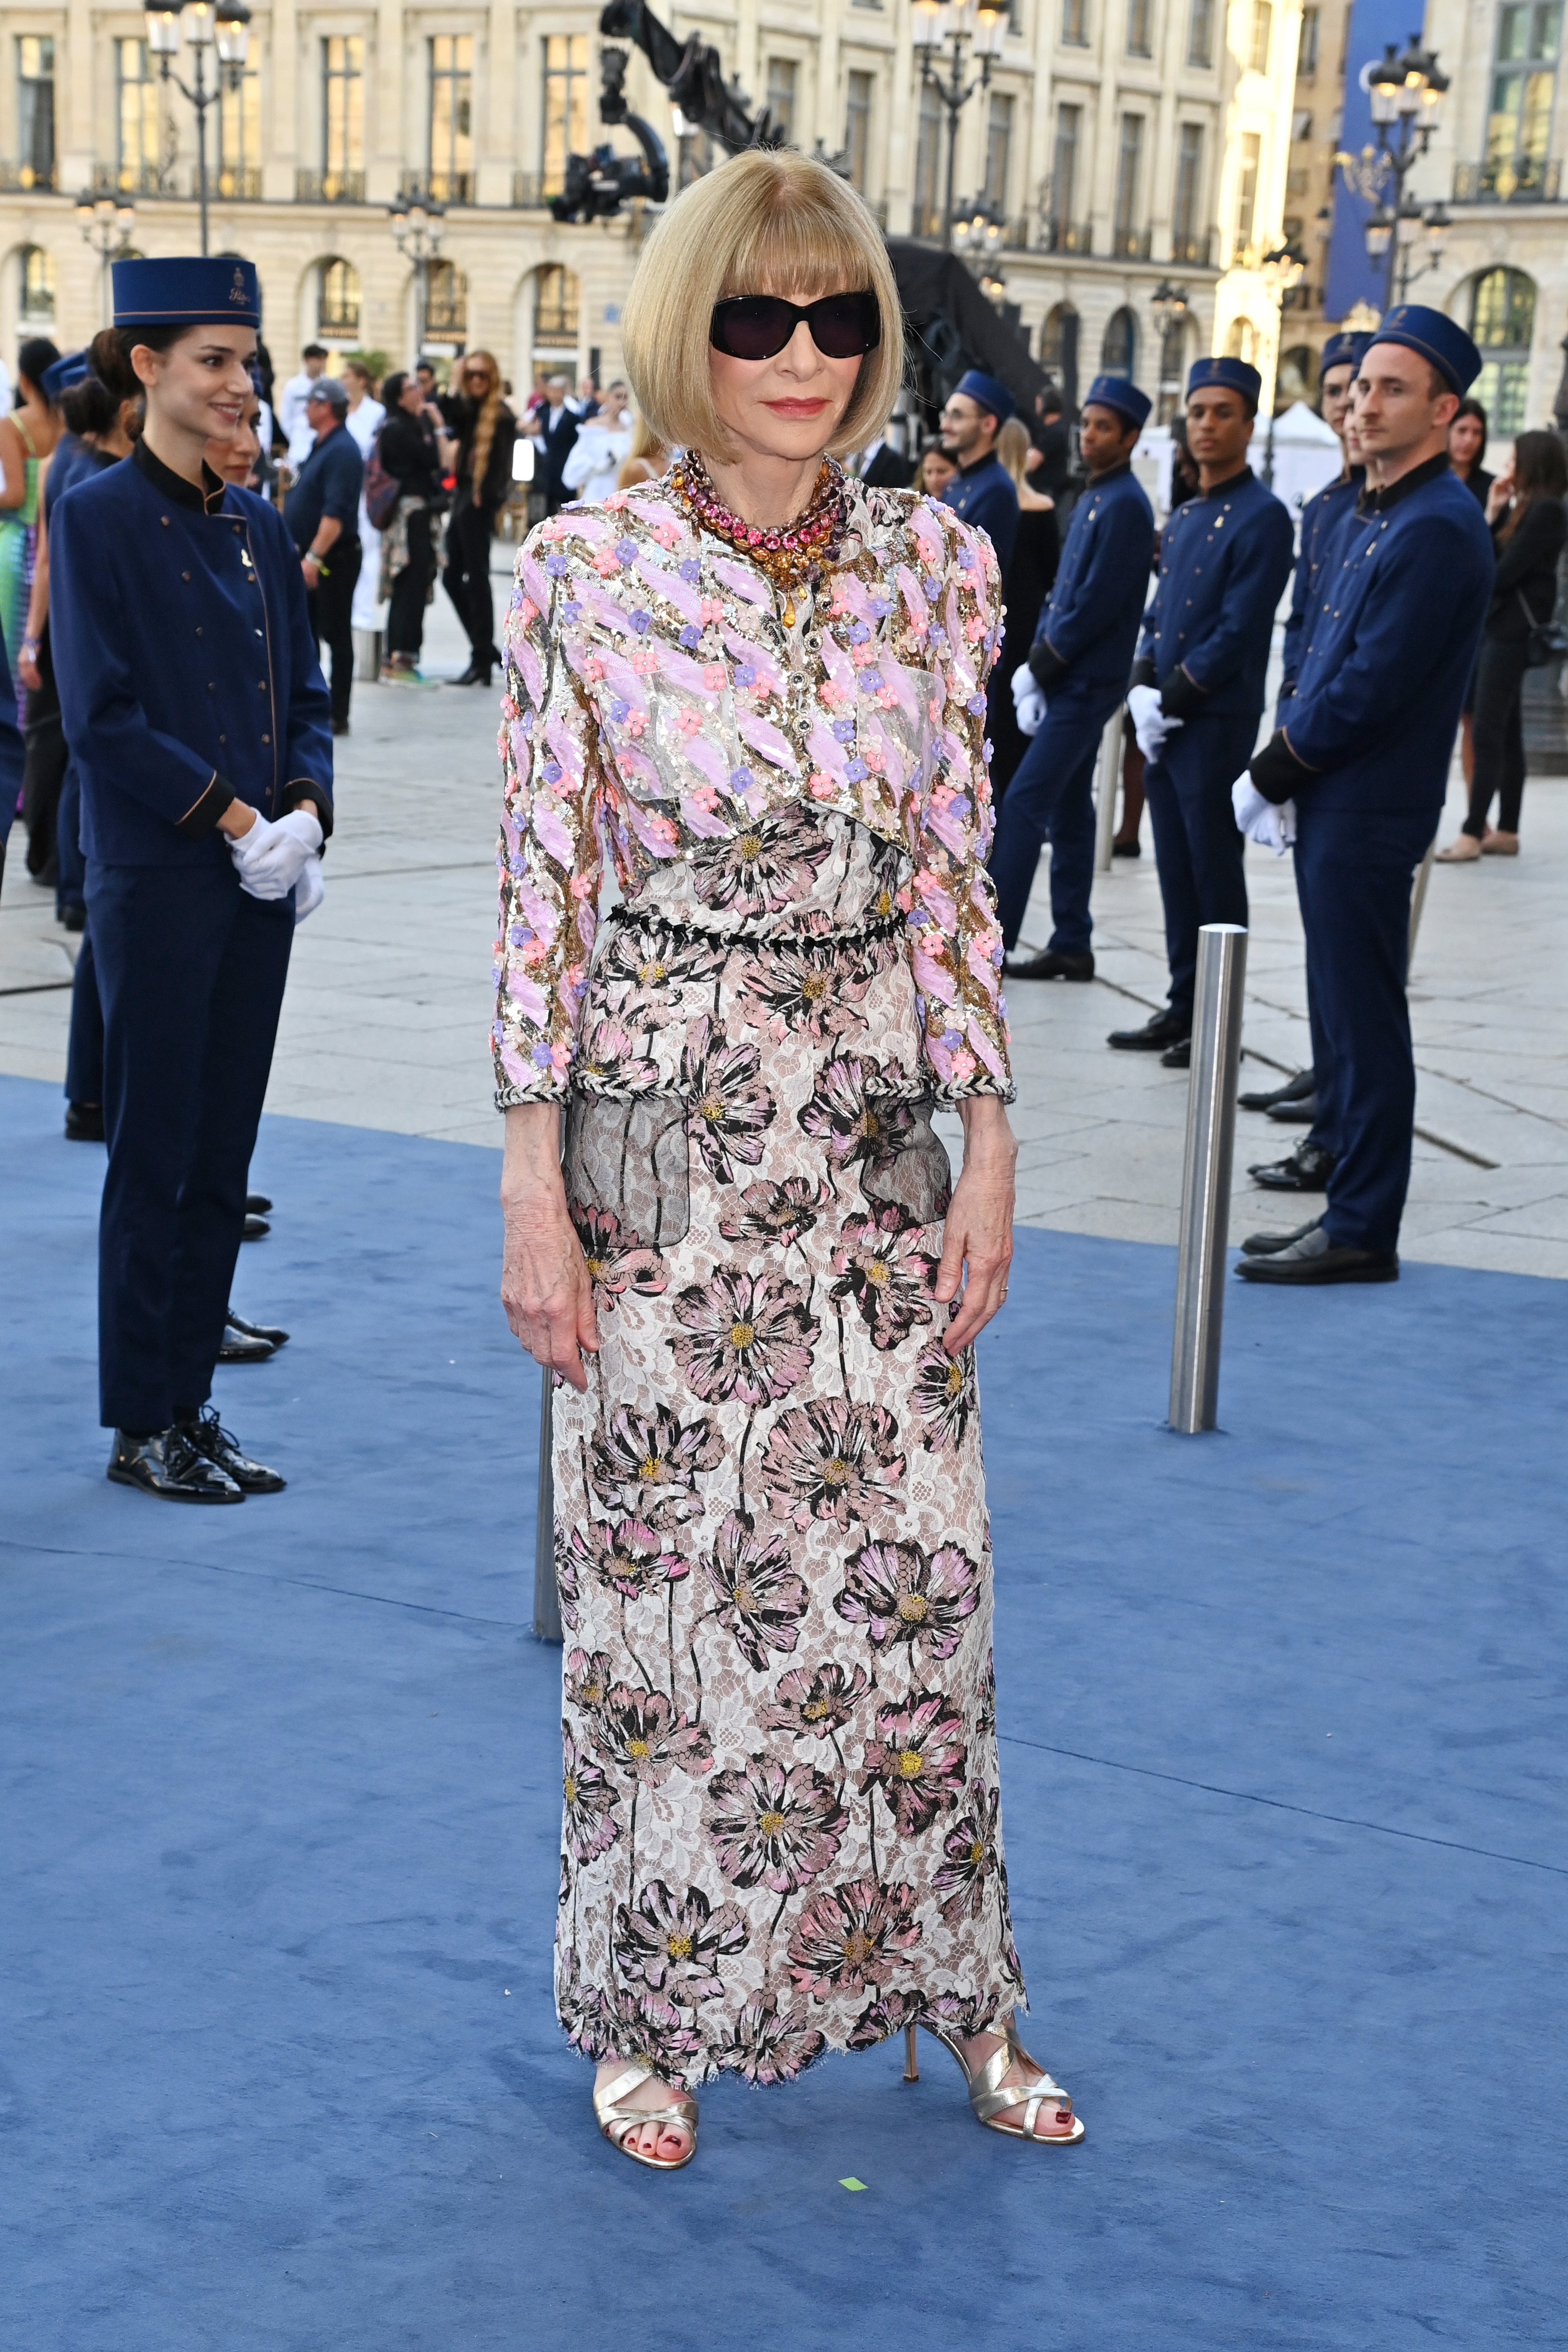 Anna Wintour poses at an event in dark sunglasses and a matching skirt and blazer